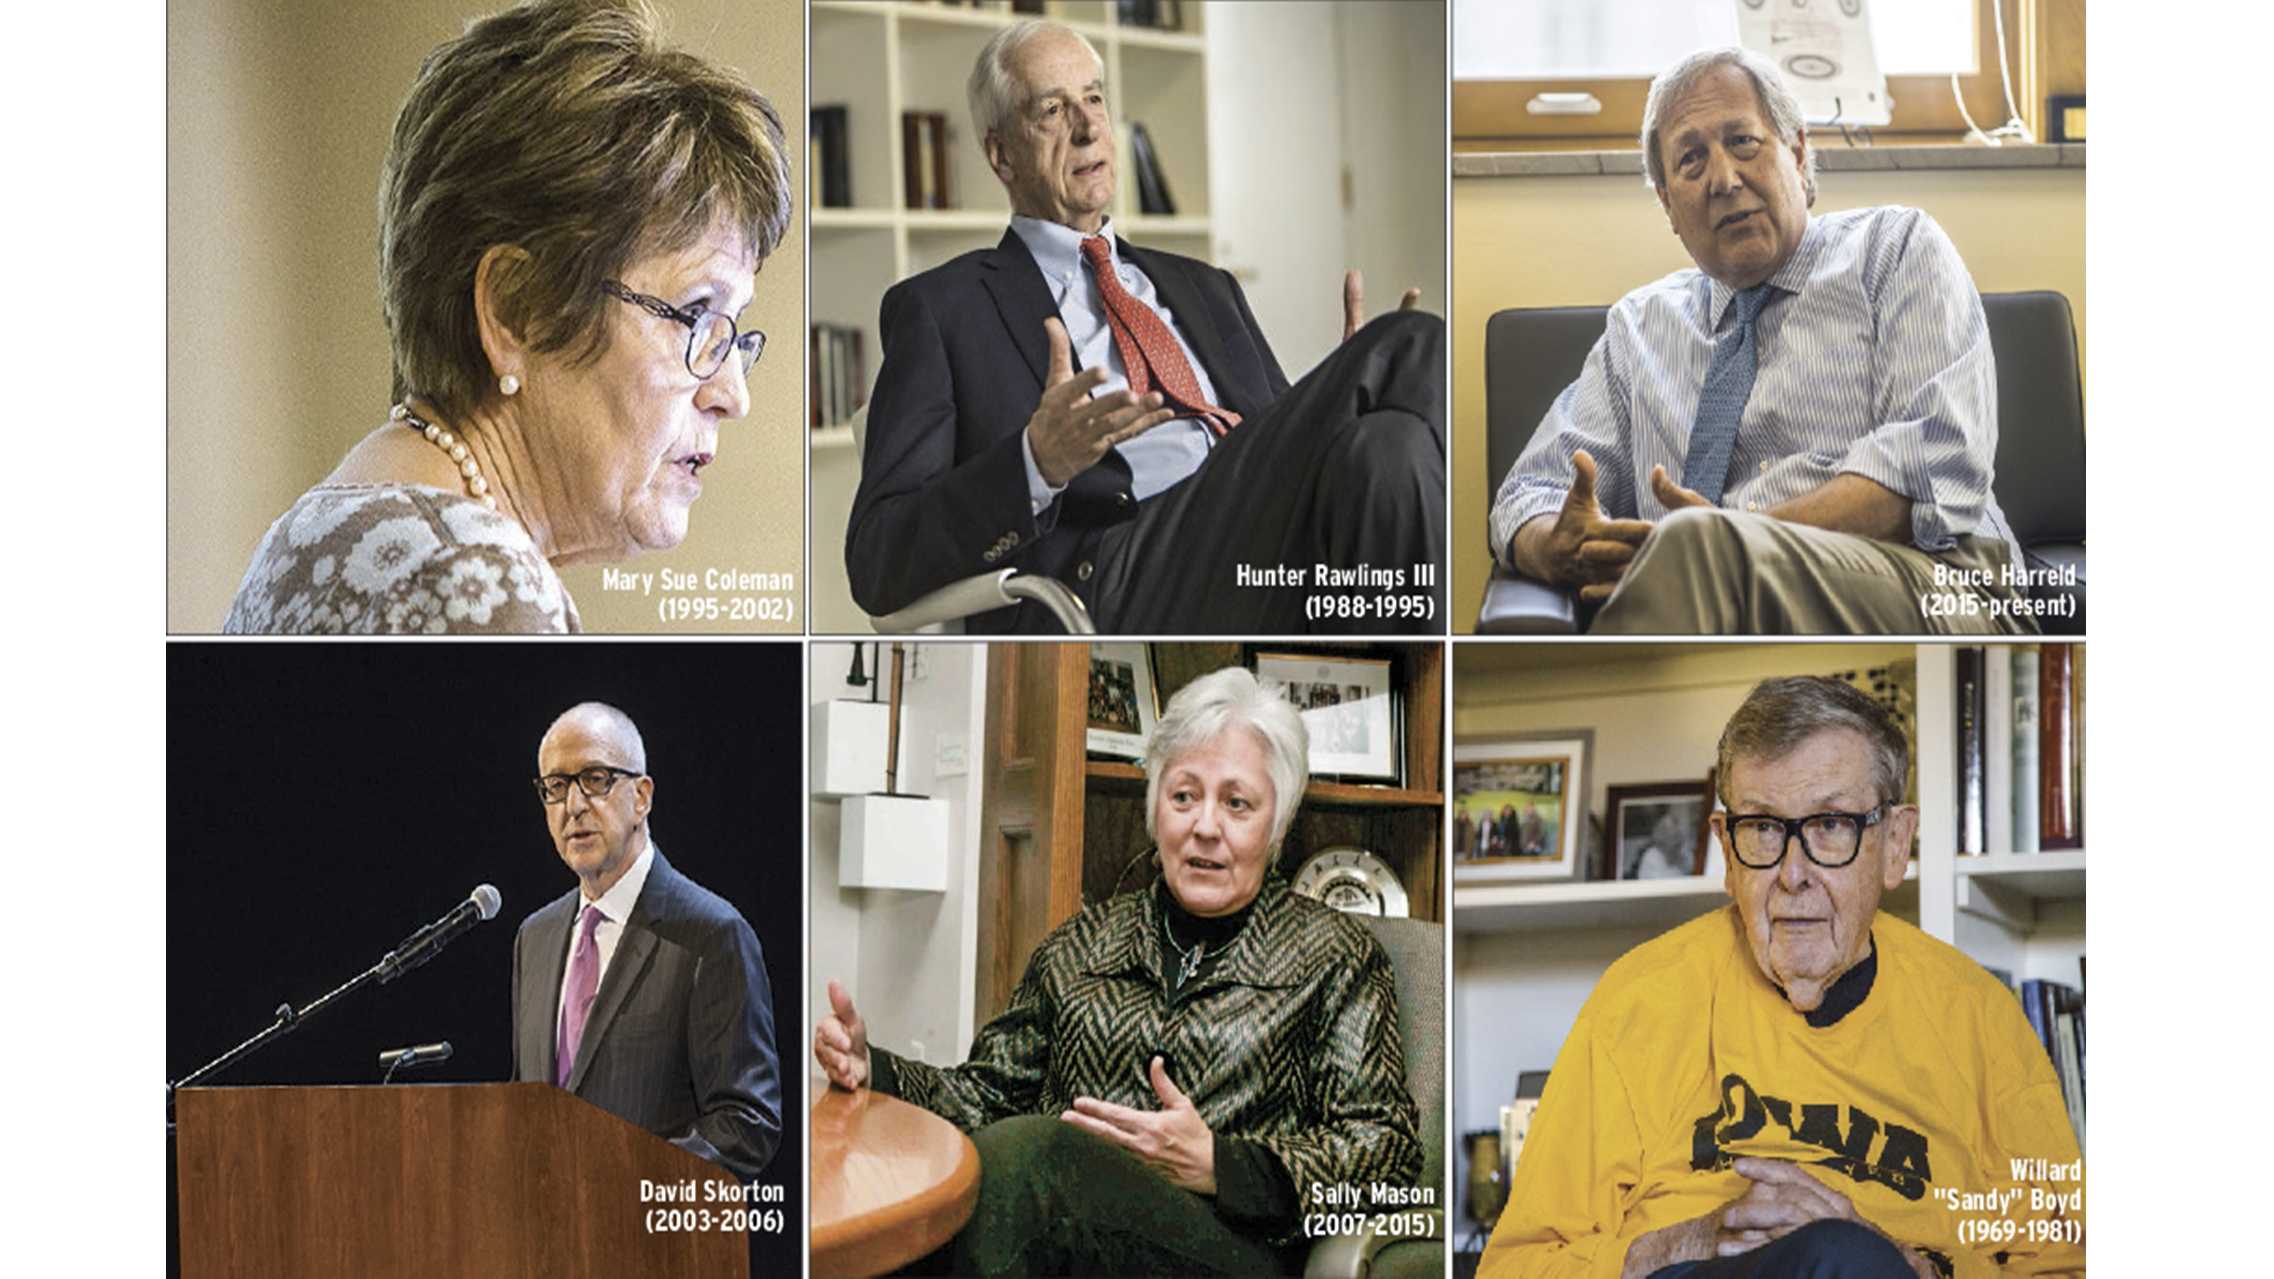 The six living University of Iowa presidents are shown in the present day. Images by The Daily Iowan staff. Hunter Rawlings (top middle) by Robert Barker/Cornell University Photography.